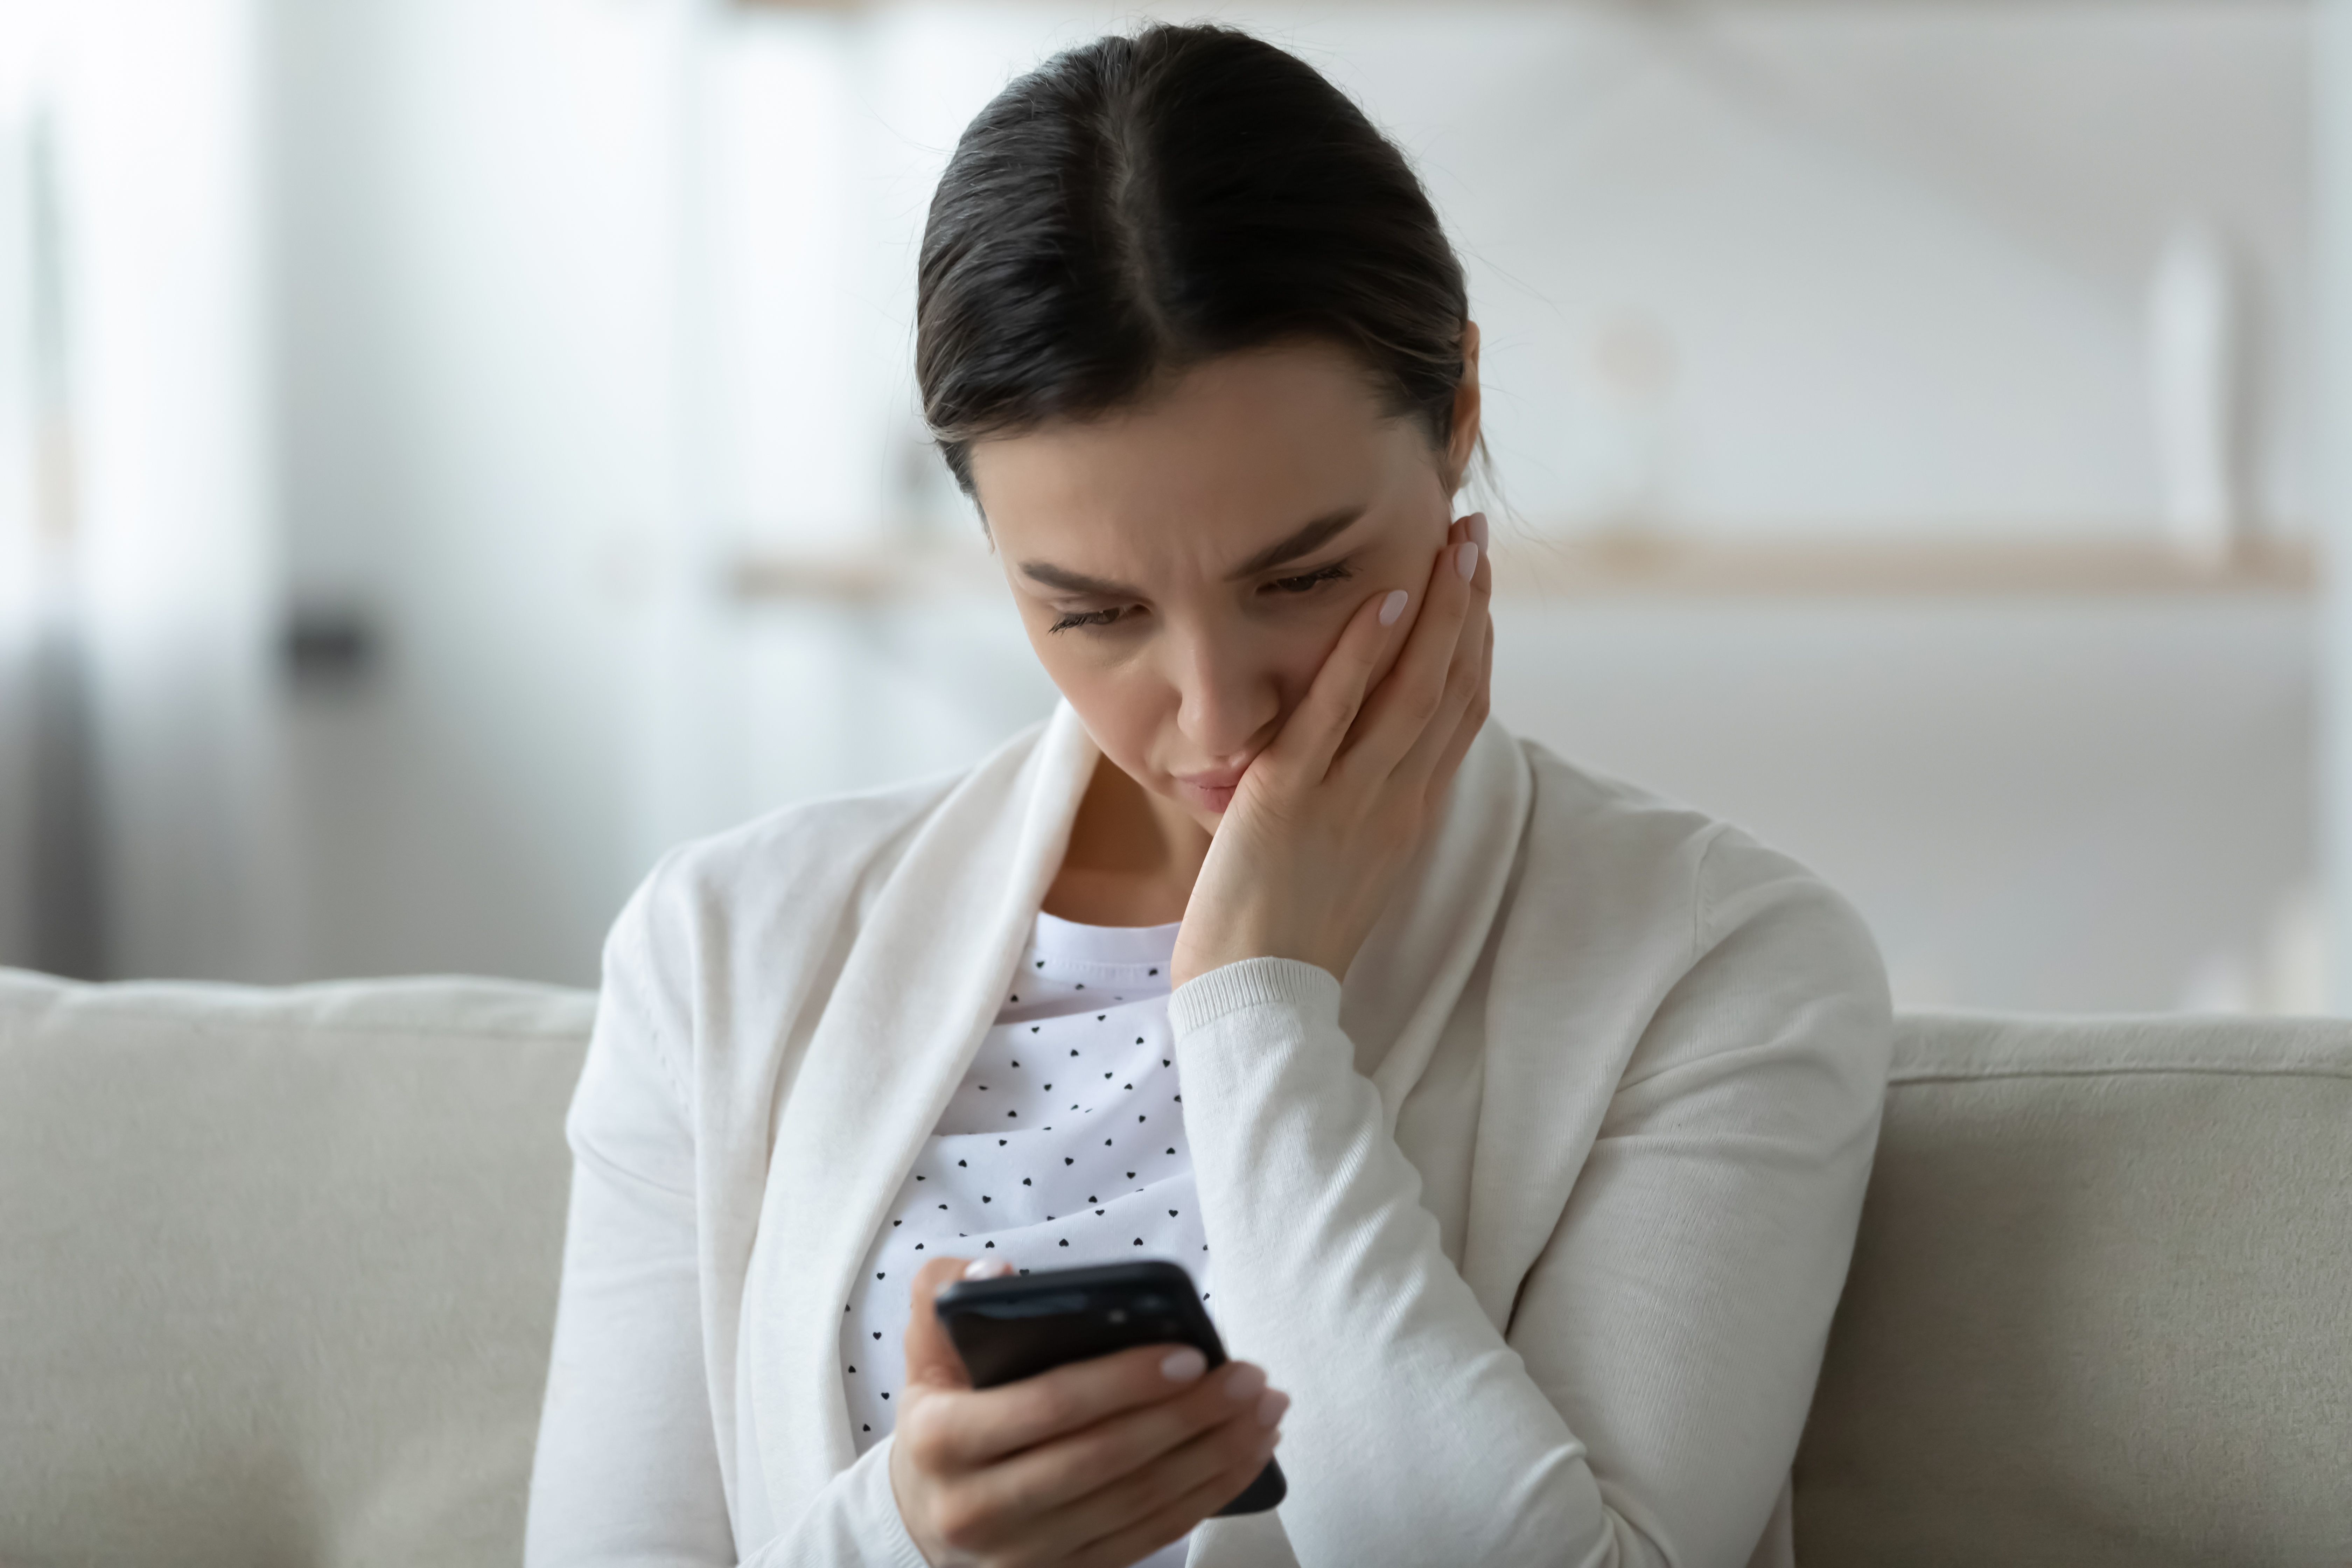 An unhappy young woman looking at her cellphone | Source: Shutterstock